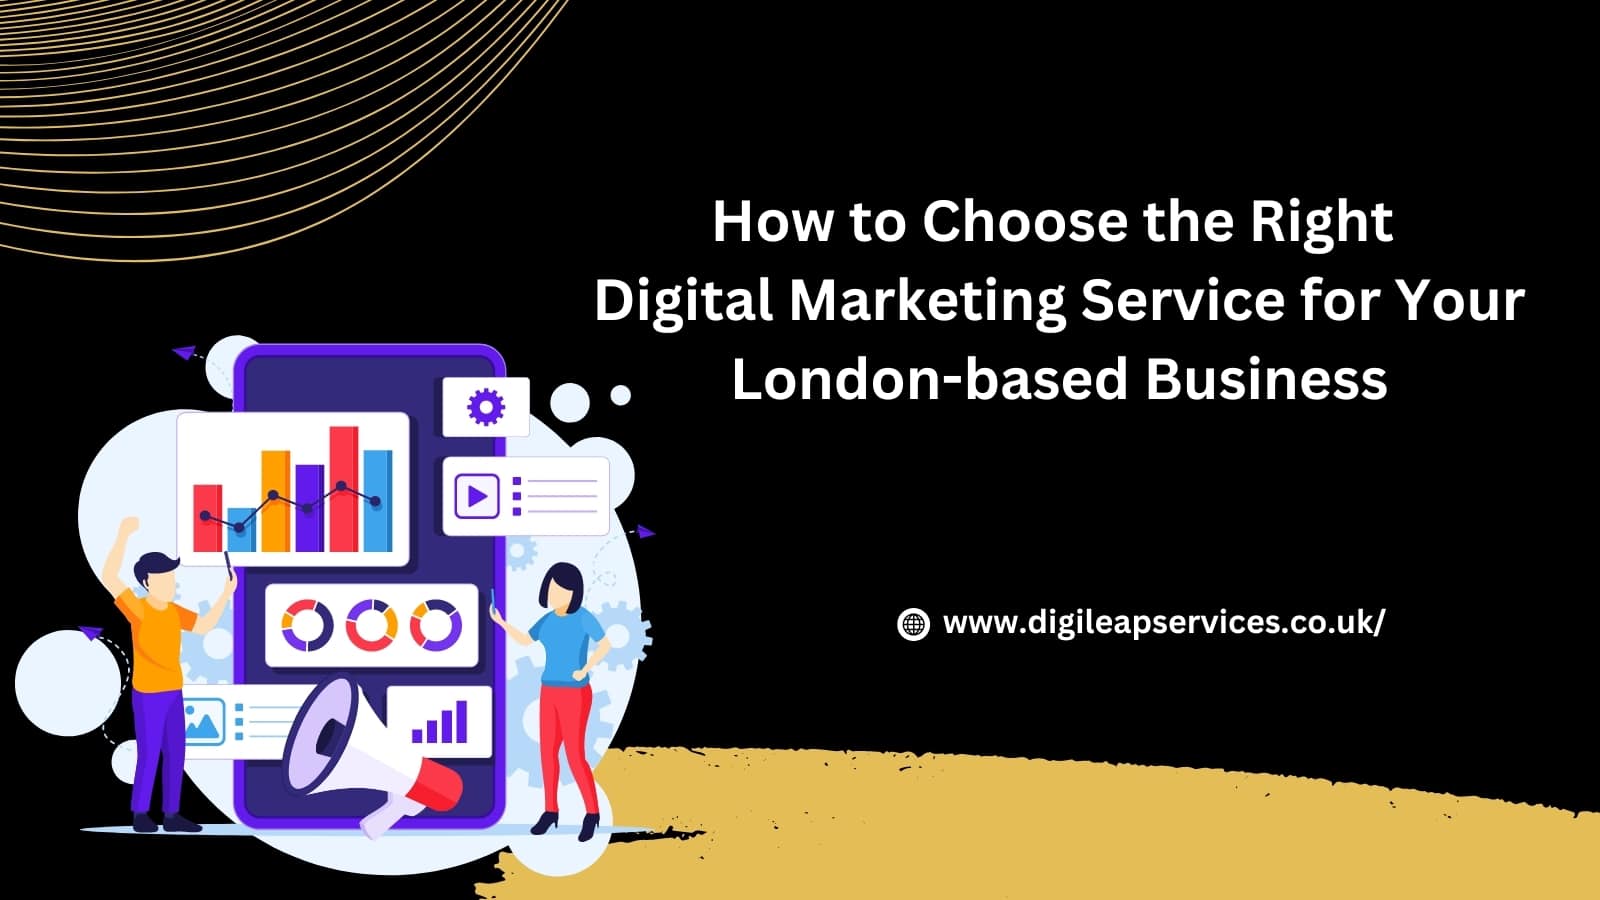 How to Choose the Right Digital Marketing Service for Your London-based Business